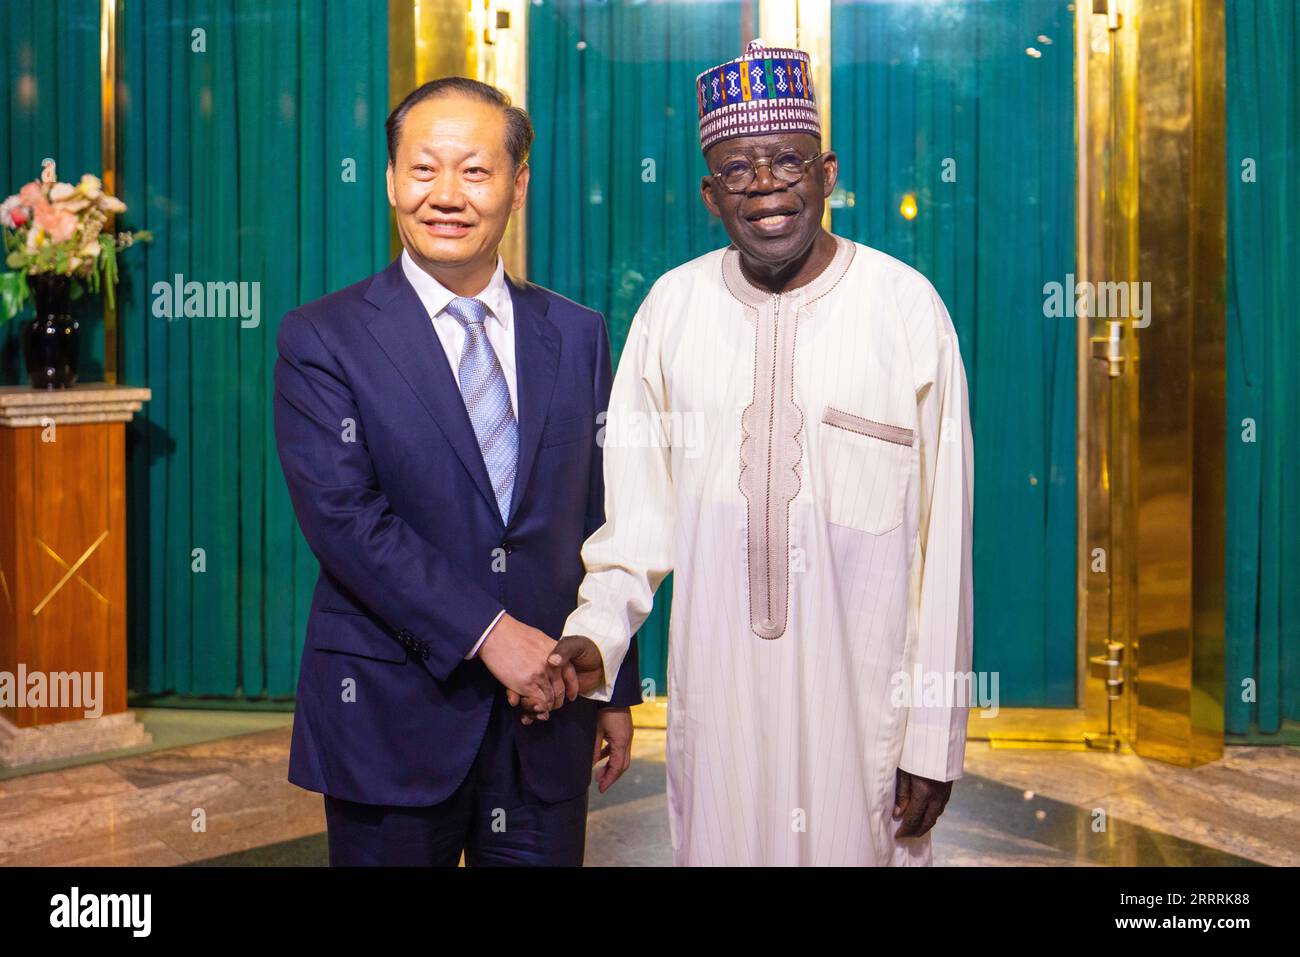 230601 -- ABUJA, June 1, 2023 -- Nigerian President Bola Tinubu meets with Special Envoy of Chinese President Xi Jinping and Vice Chairman of the Standing Committee of the National People s Congress Peng Qinghua, in Abuja, Nigeria, on May 31, 2023. At the invitation of the government of the Federal Republic of Nigeria, Peng Qinghua attended Bola Tinubu s inauguration in Abuja on May 29. Photo by Nosa/Xinhua NIGERIA-ABUJA-CHINA-SPECIAL ENVOY NuoxSa PUBLICATIONxNOTxINxCHN Stock Photo